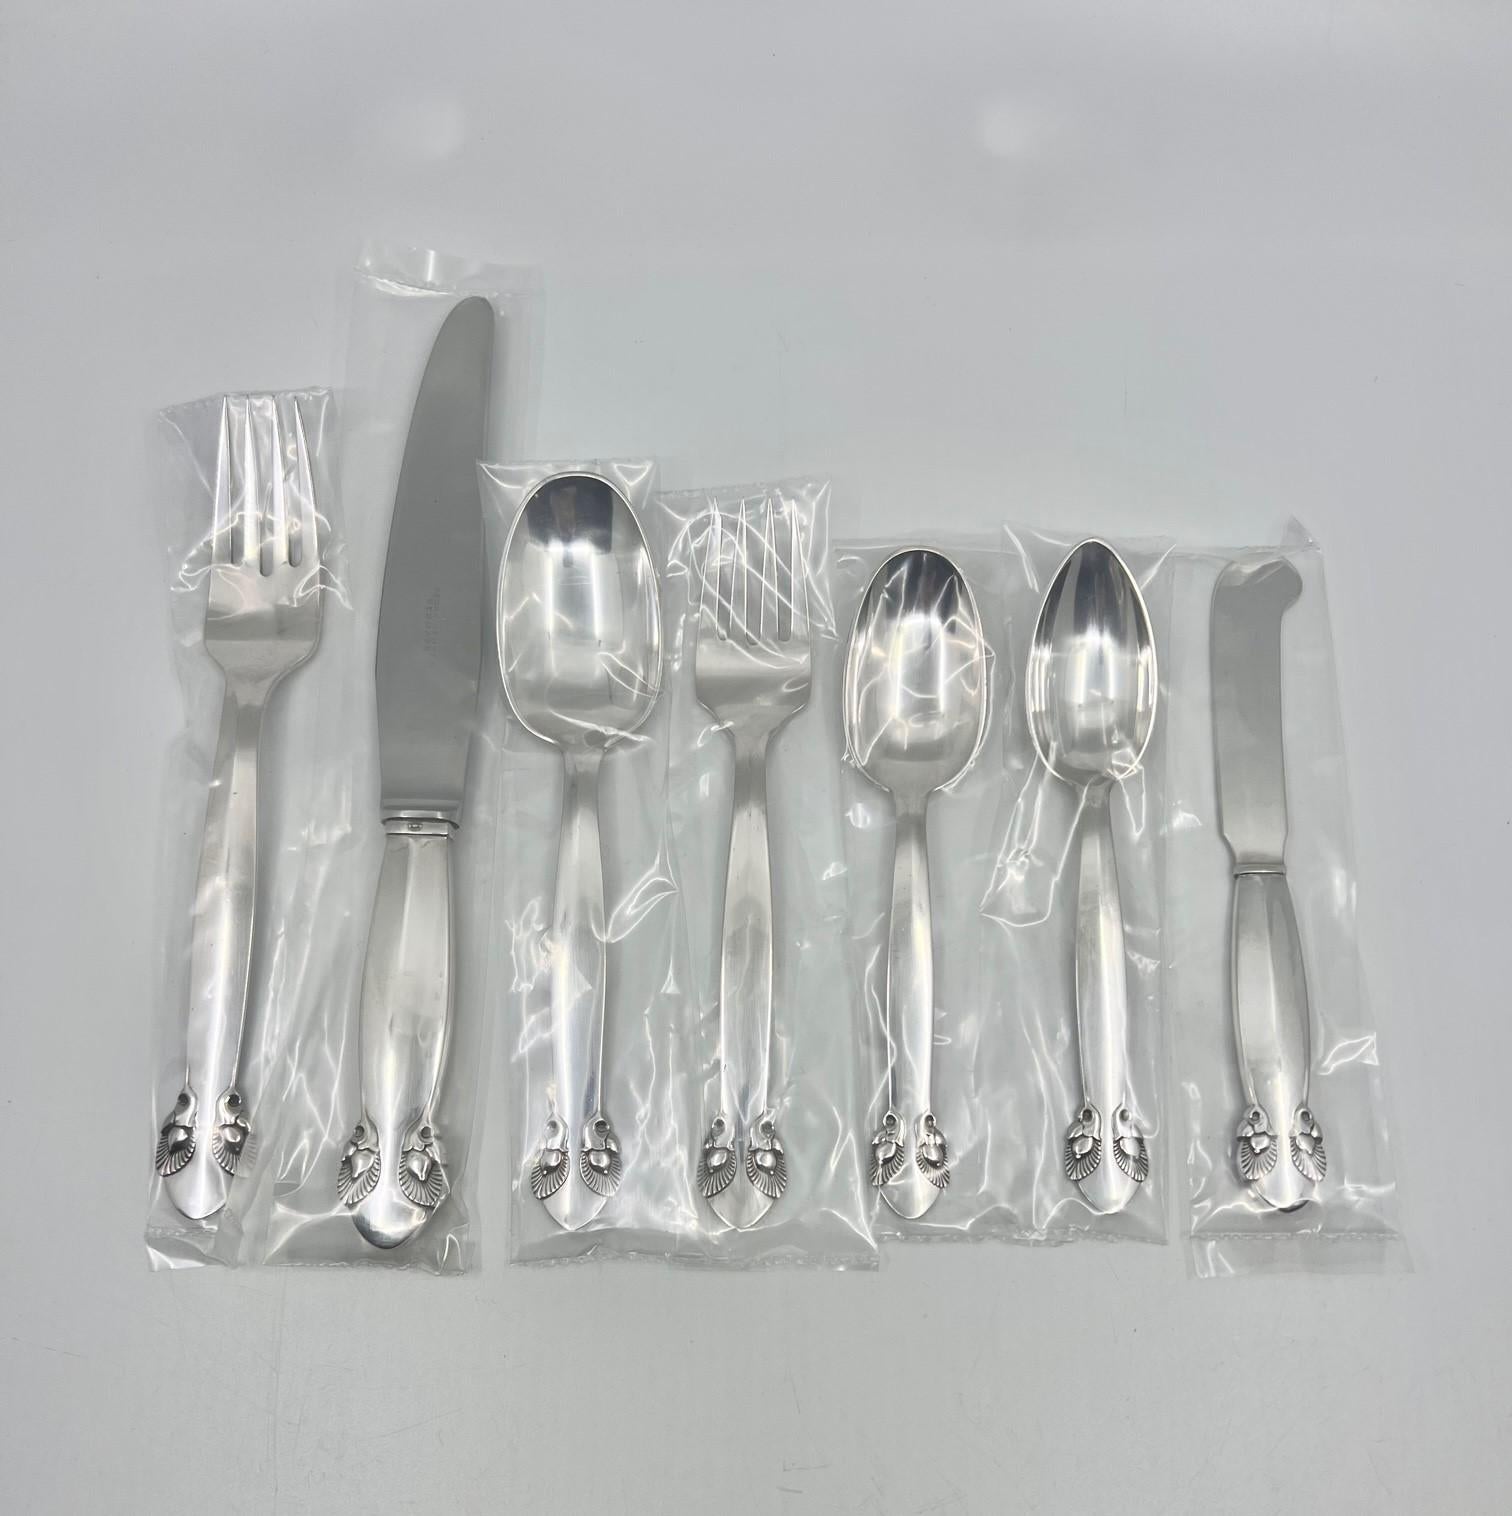 A vintage Georg Jensen sterling silverware service in the rare Bittersweet pattern, design #79 from 1940 by Gundorph Albertus. This is the sister pattern to Cactus, also designed by Gundorph Albertus. This estate set was all bought at Georg Jensen